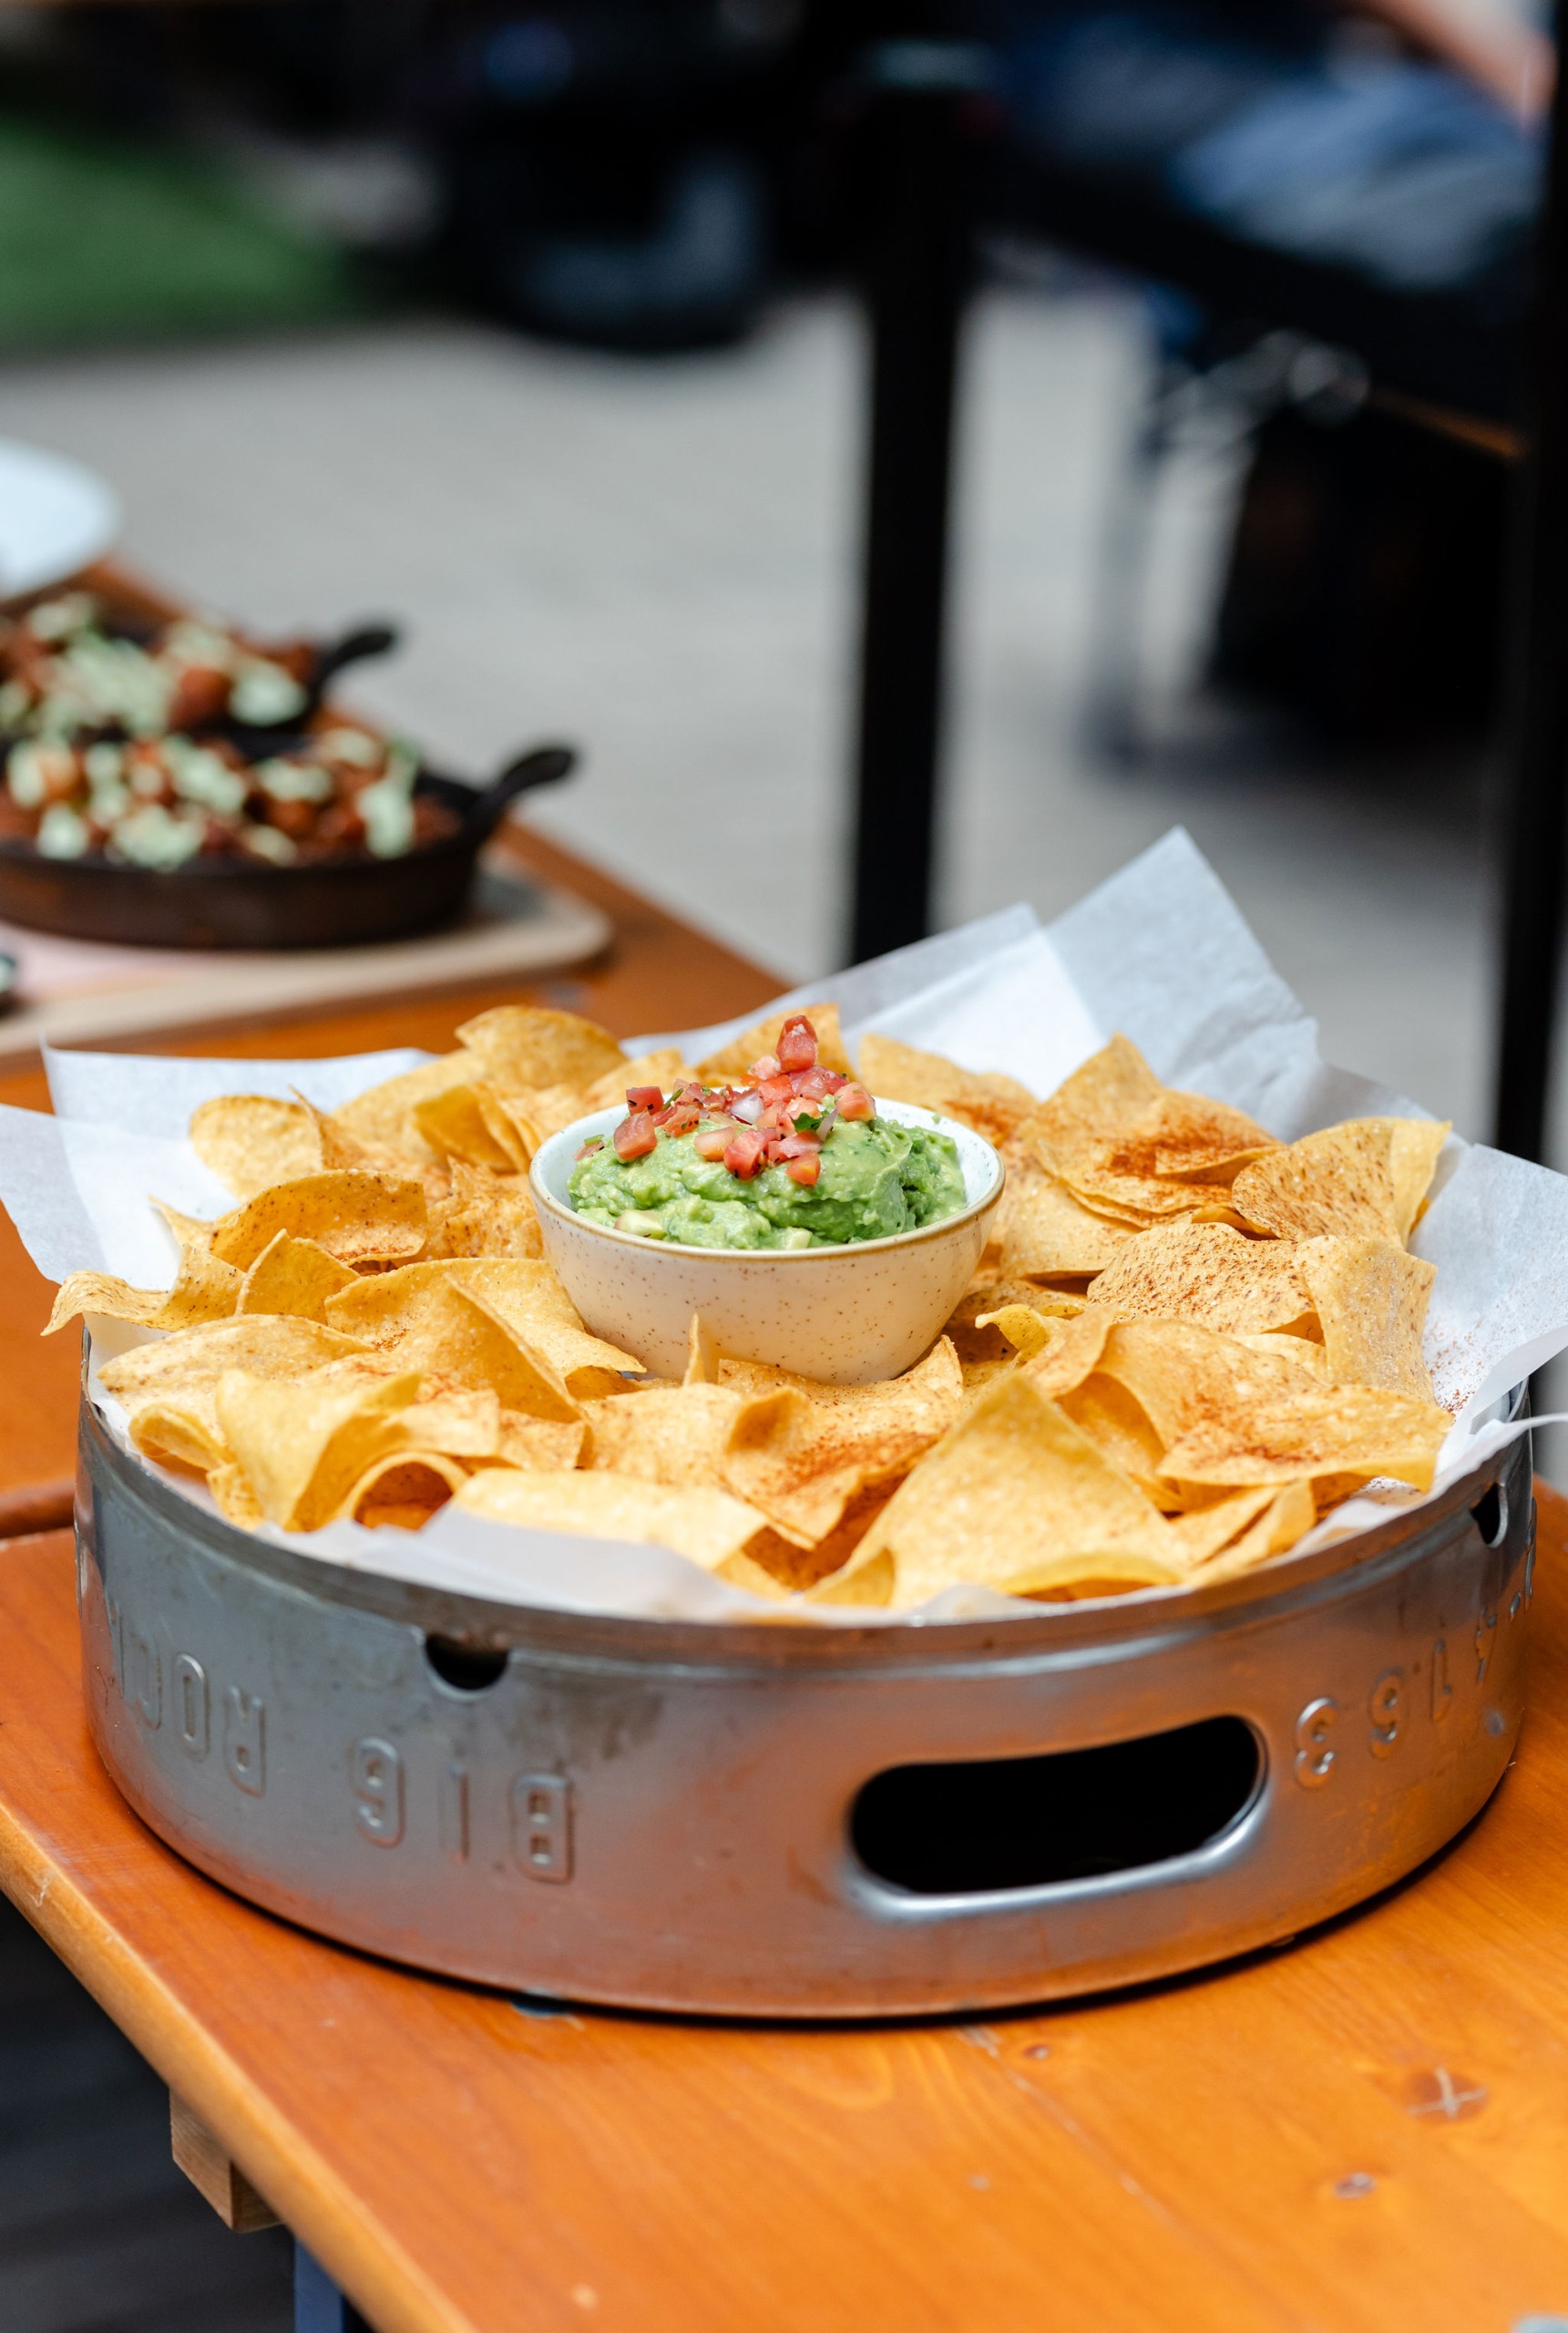 Social event featuring guacamole and chips on a wooden table.